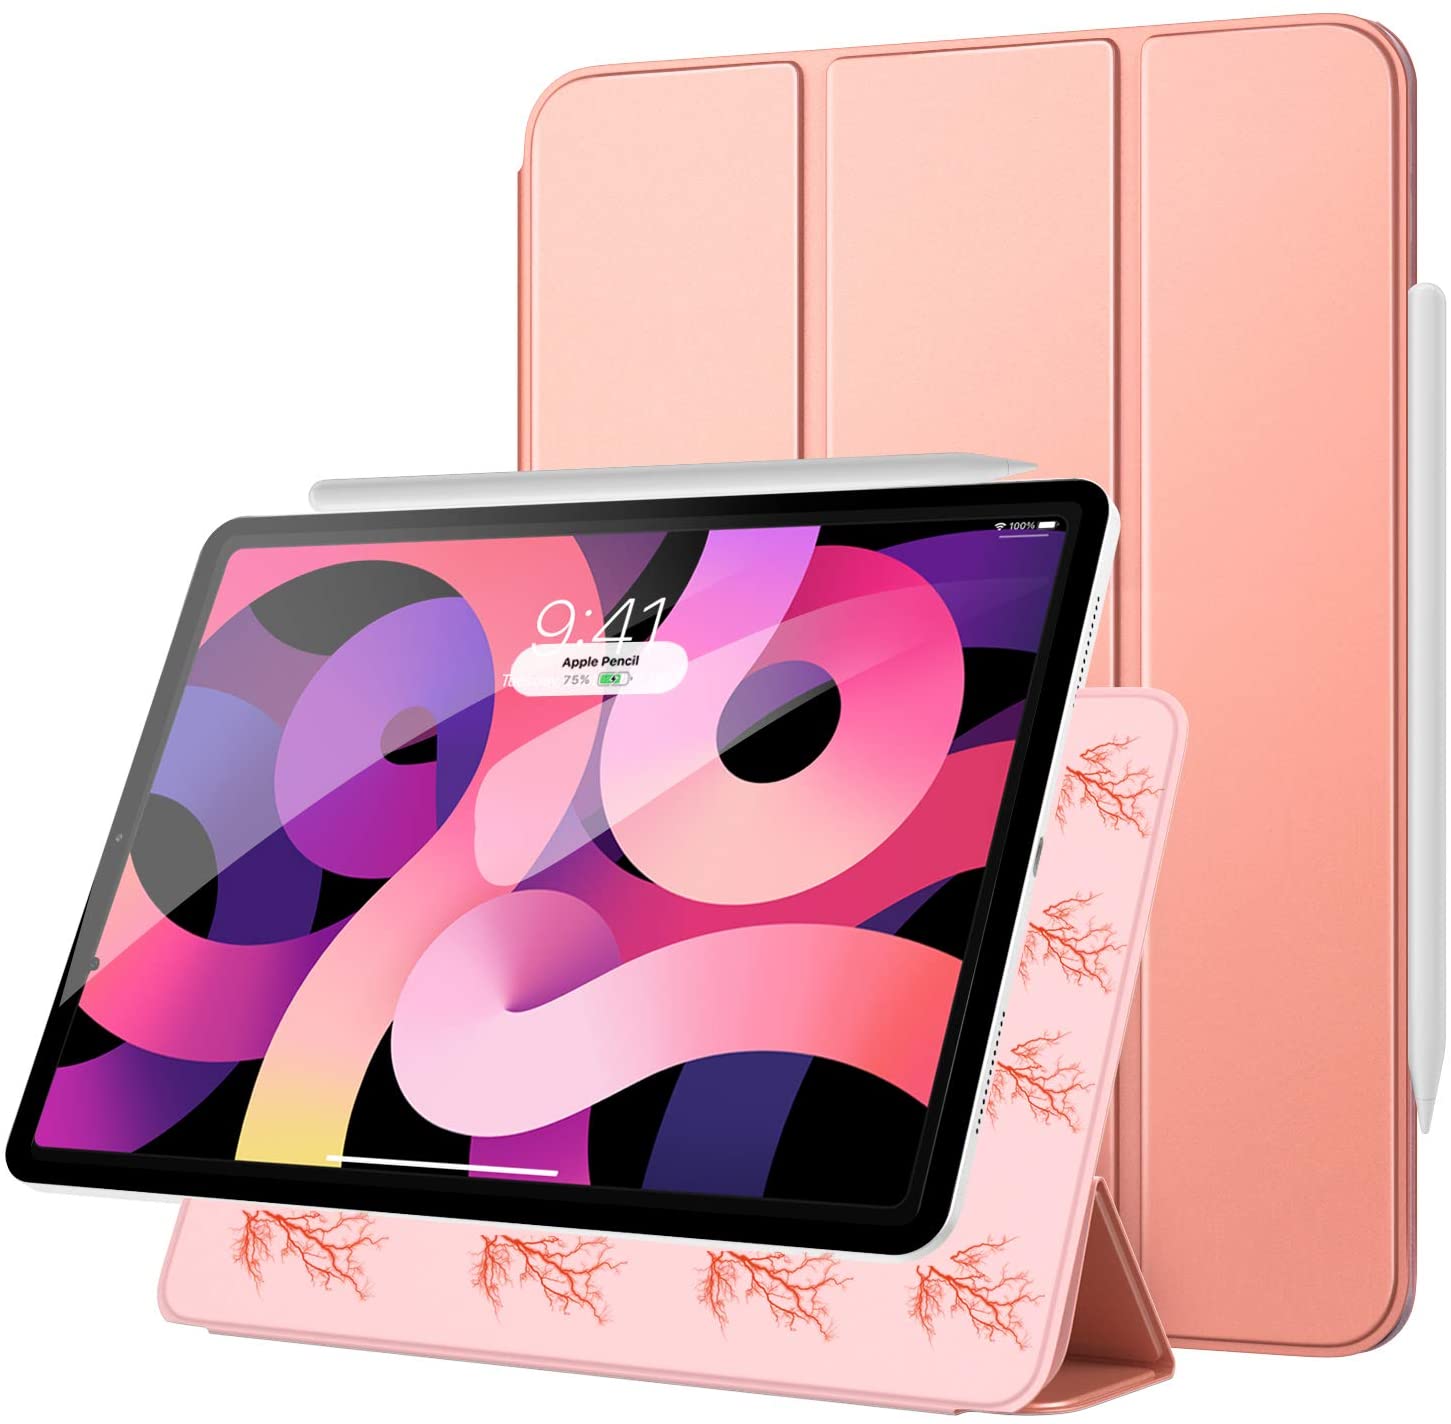 MoKo Magnetic Case Fit New iPad Air 4th Generation 2020 (iPad 10.9 Case)/iPad Pro 11" 2018 - Slim Lightweight Smart Folding Stand Folio Cover - ROSE GOLD - e4cents